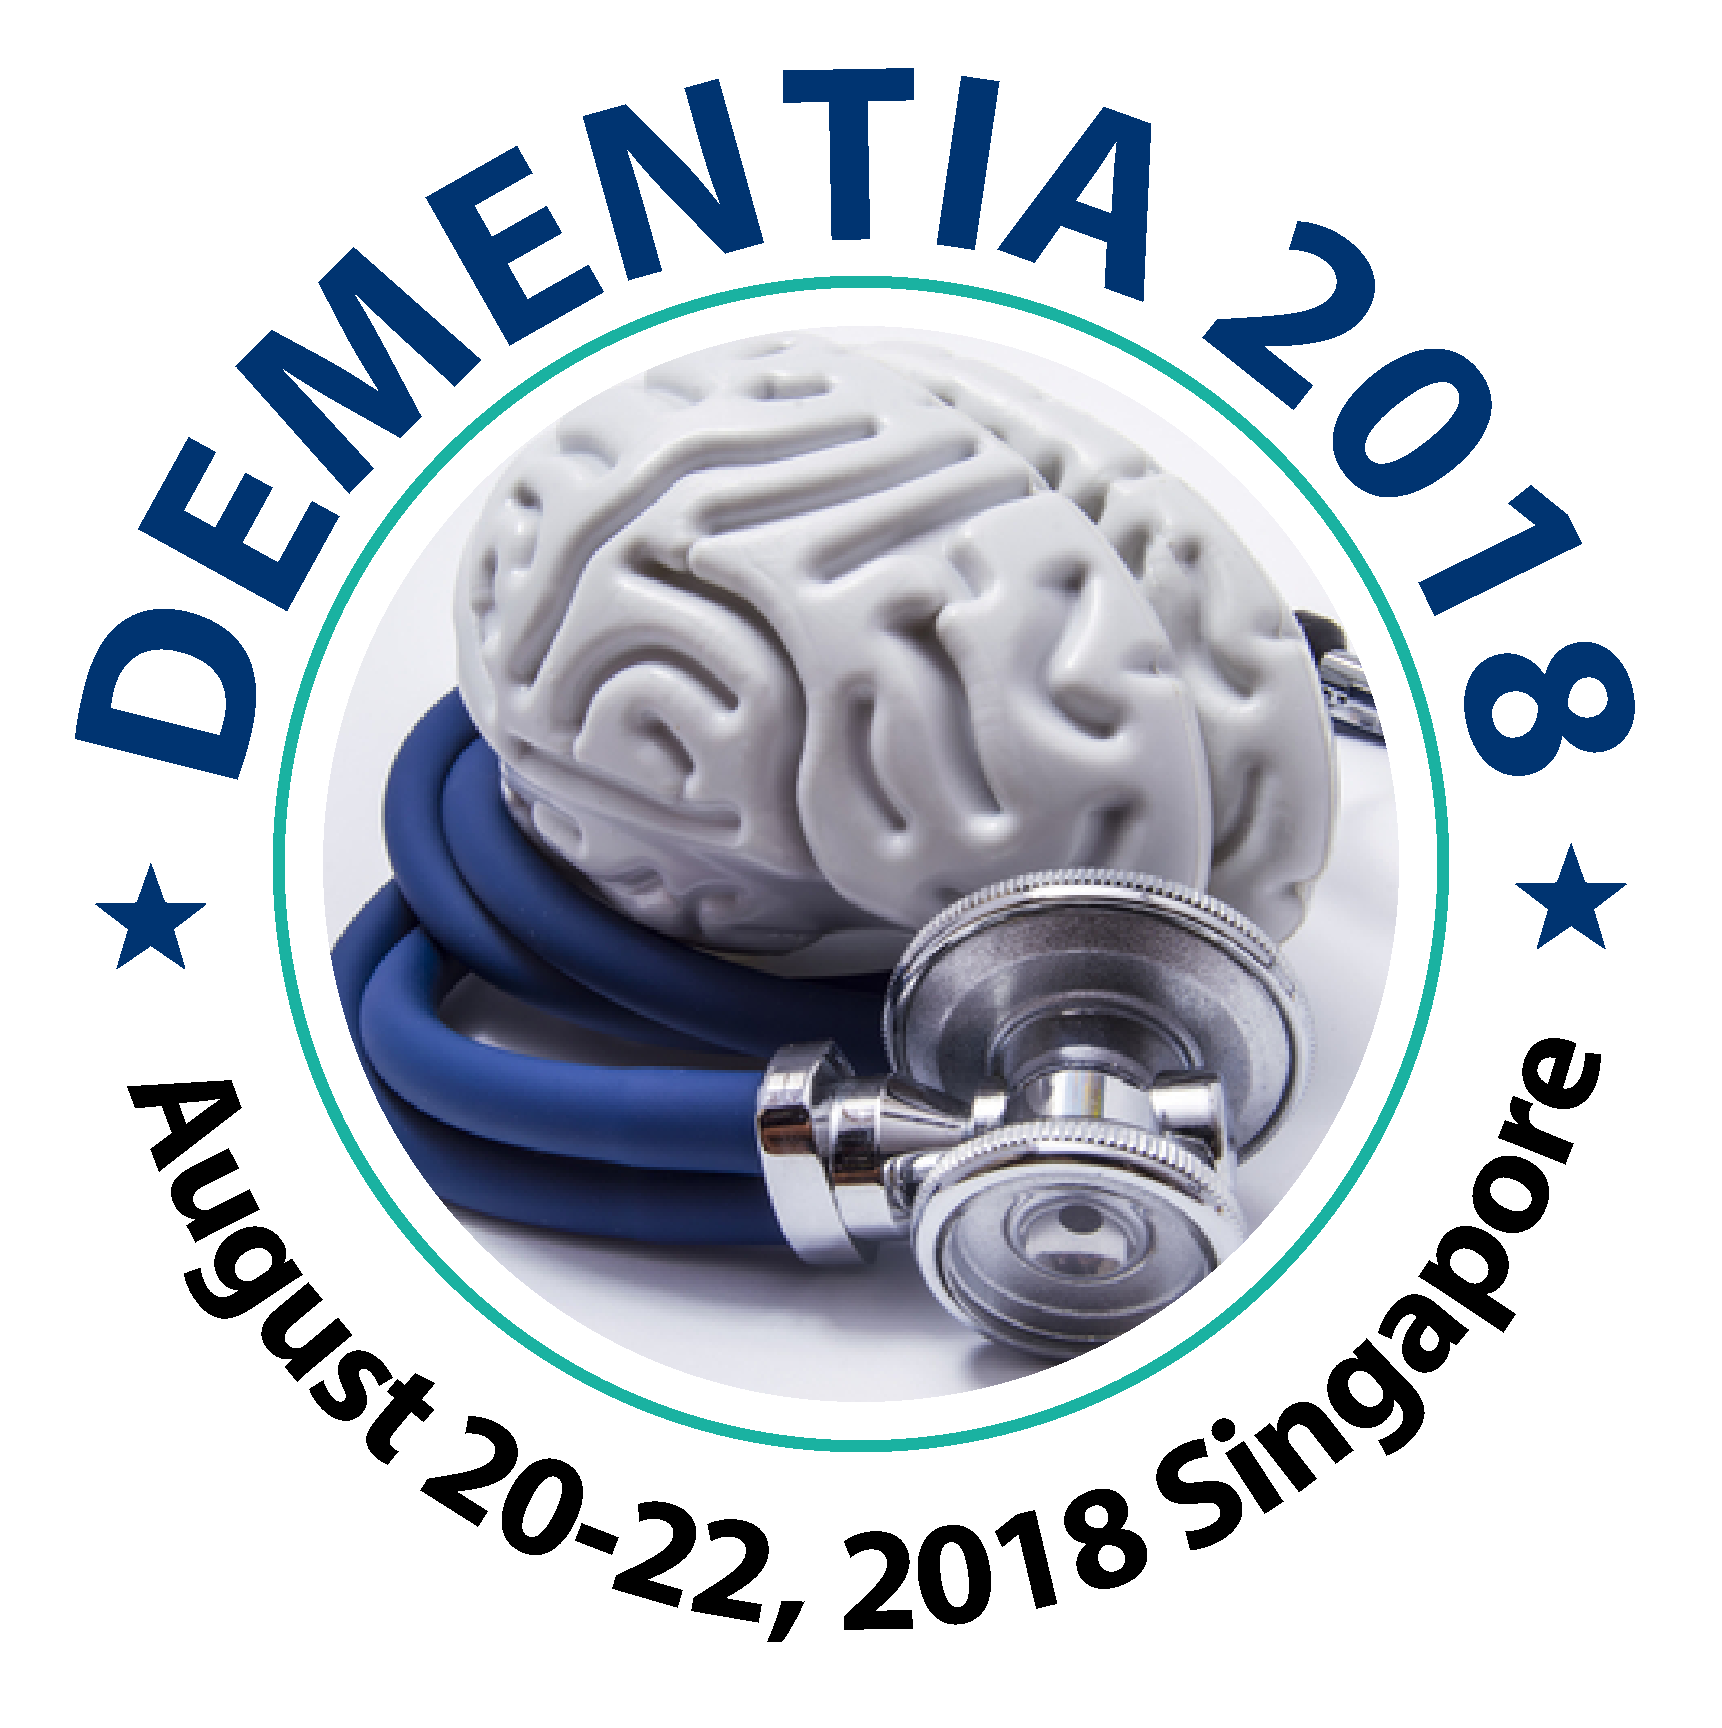 International conference on Dementia and Dementia Care